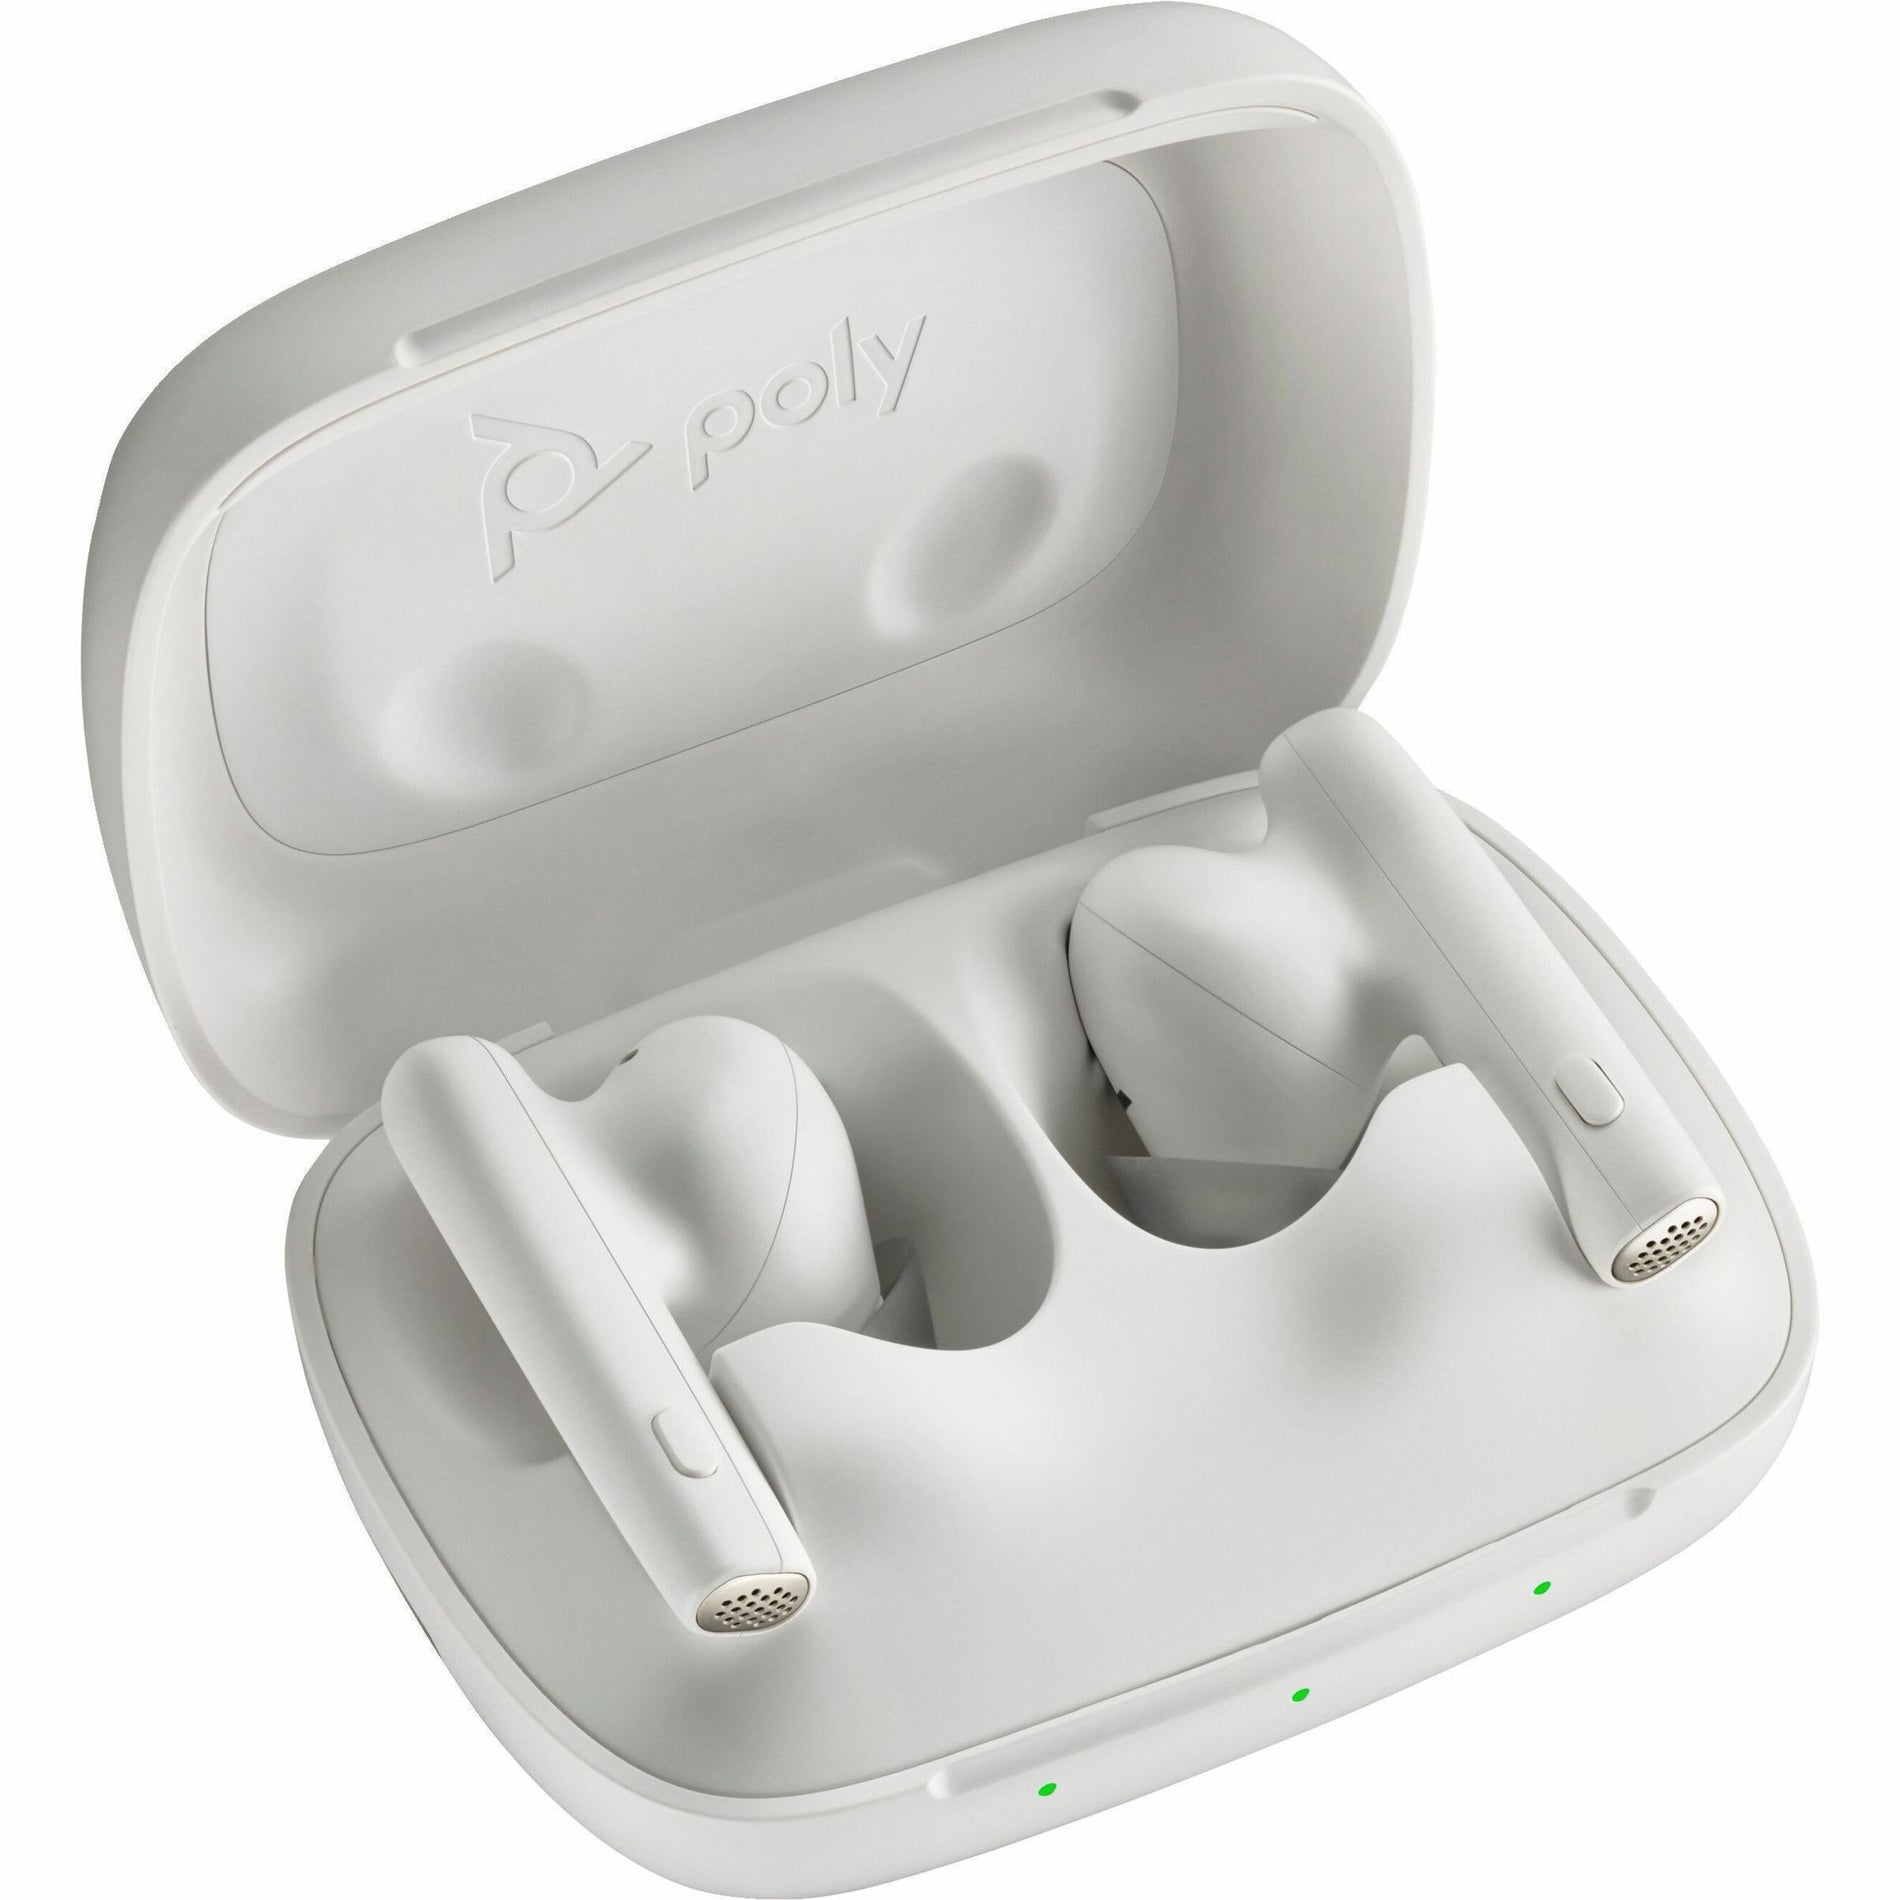 Poly 7Y8L5AA Voyager Free 60 UC M White Sand Earbuds+ BT700 USB-A Adapter + Basic Charge Case, Wireless Earset with WindSmart Technology, Lightweight, and Comfortable